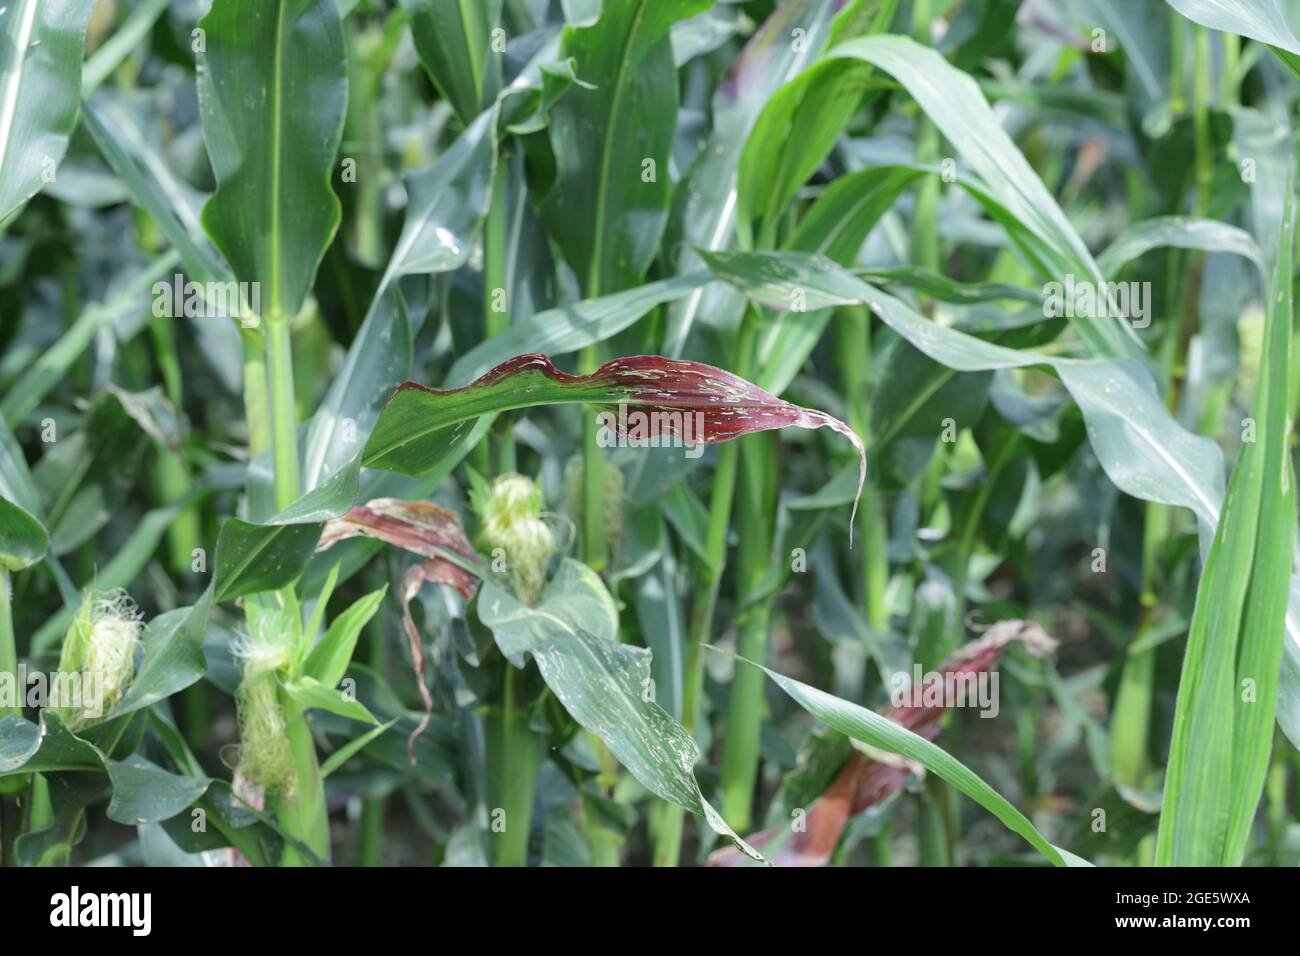 Red discoloration of corn leaves due to nutrient deficiencies or disease caused by viruses. Stock Photo